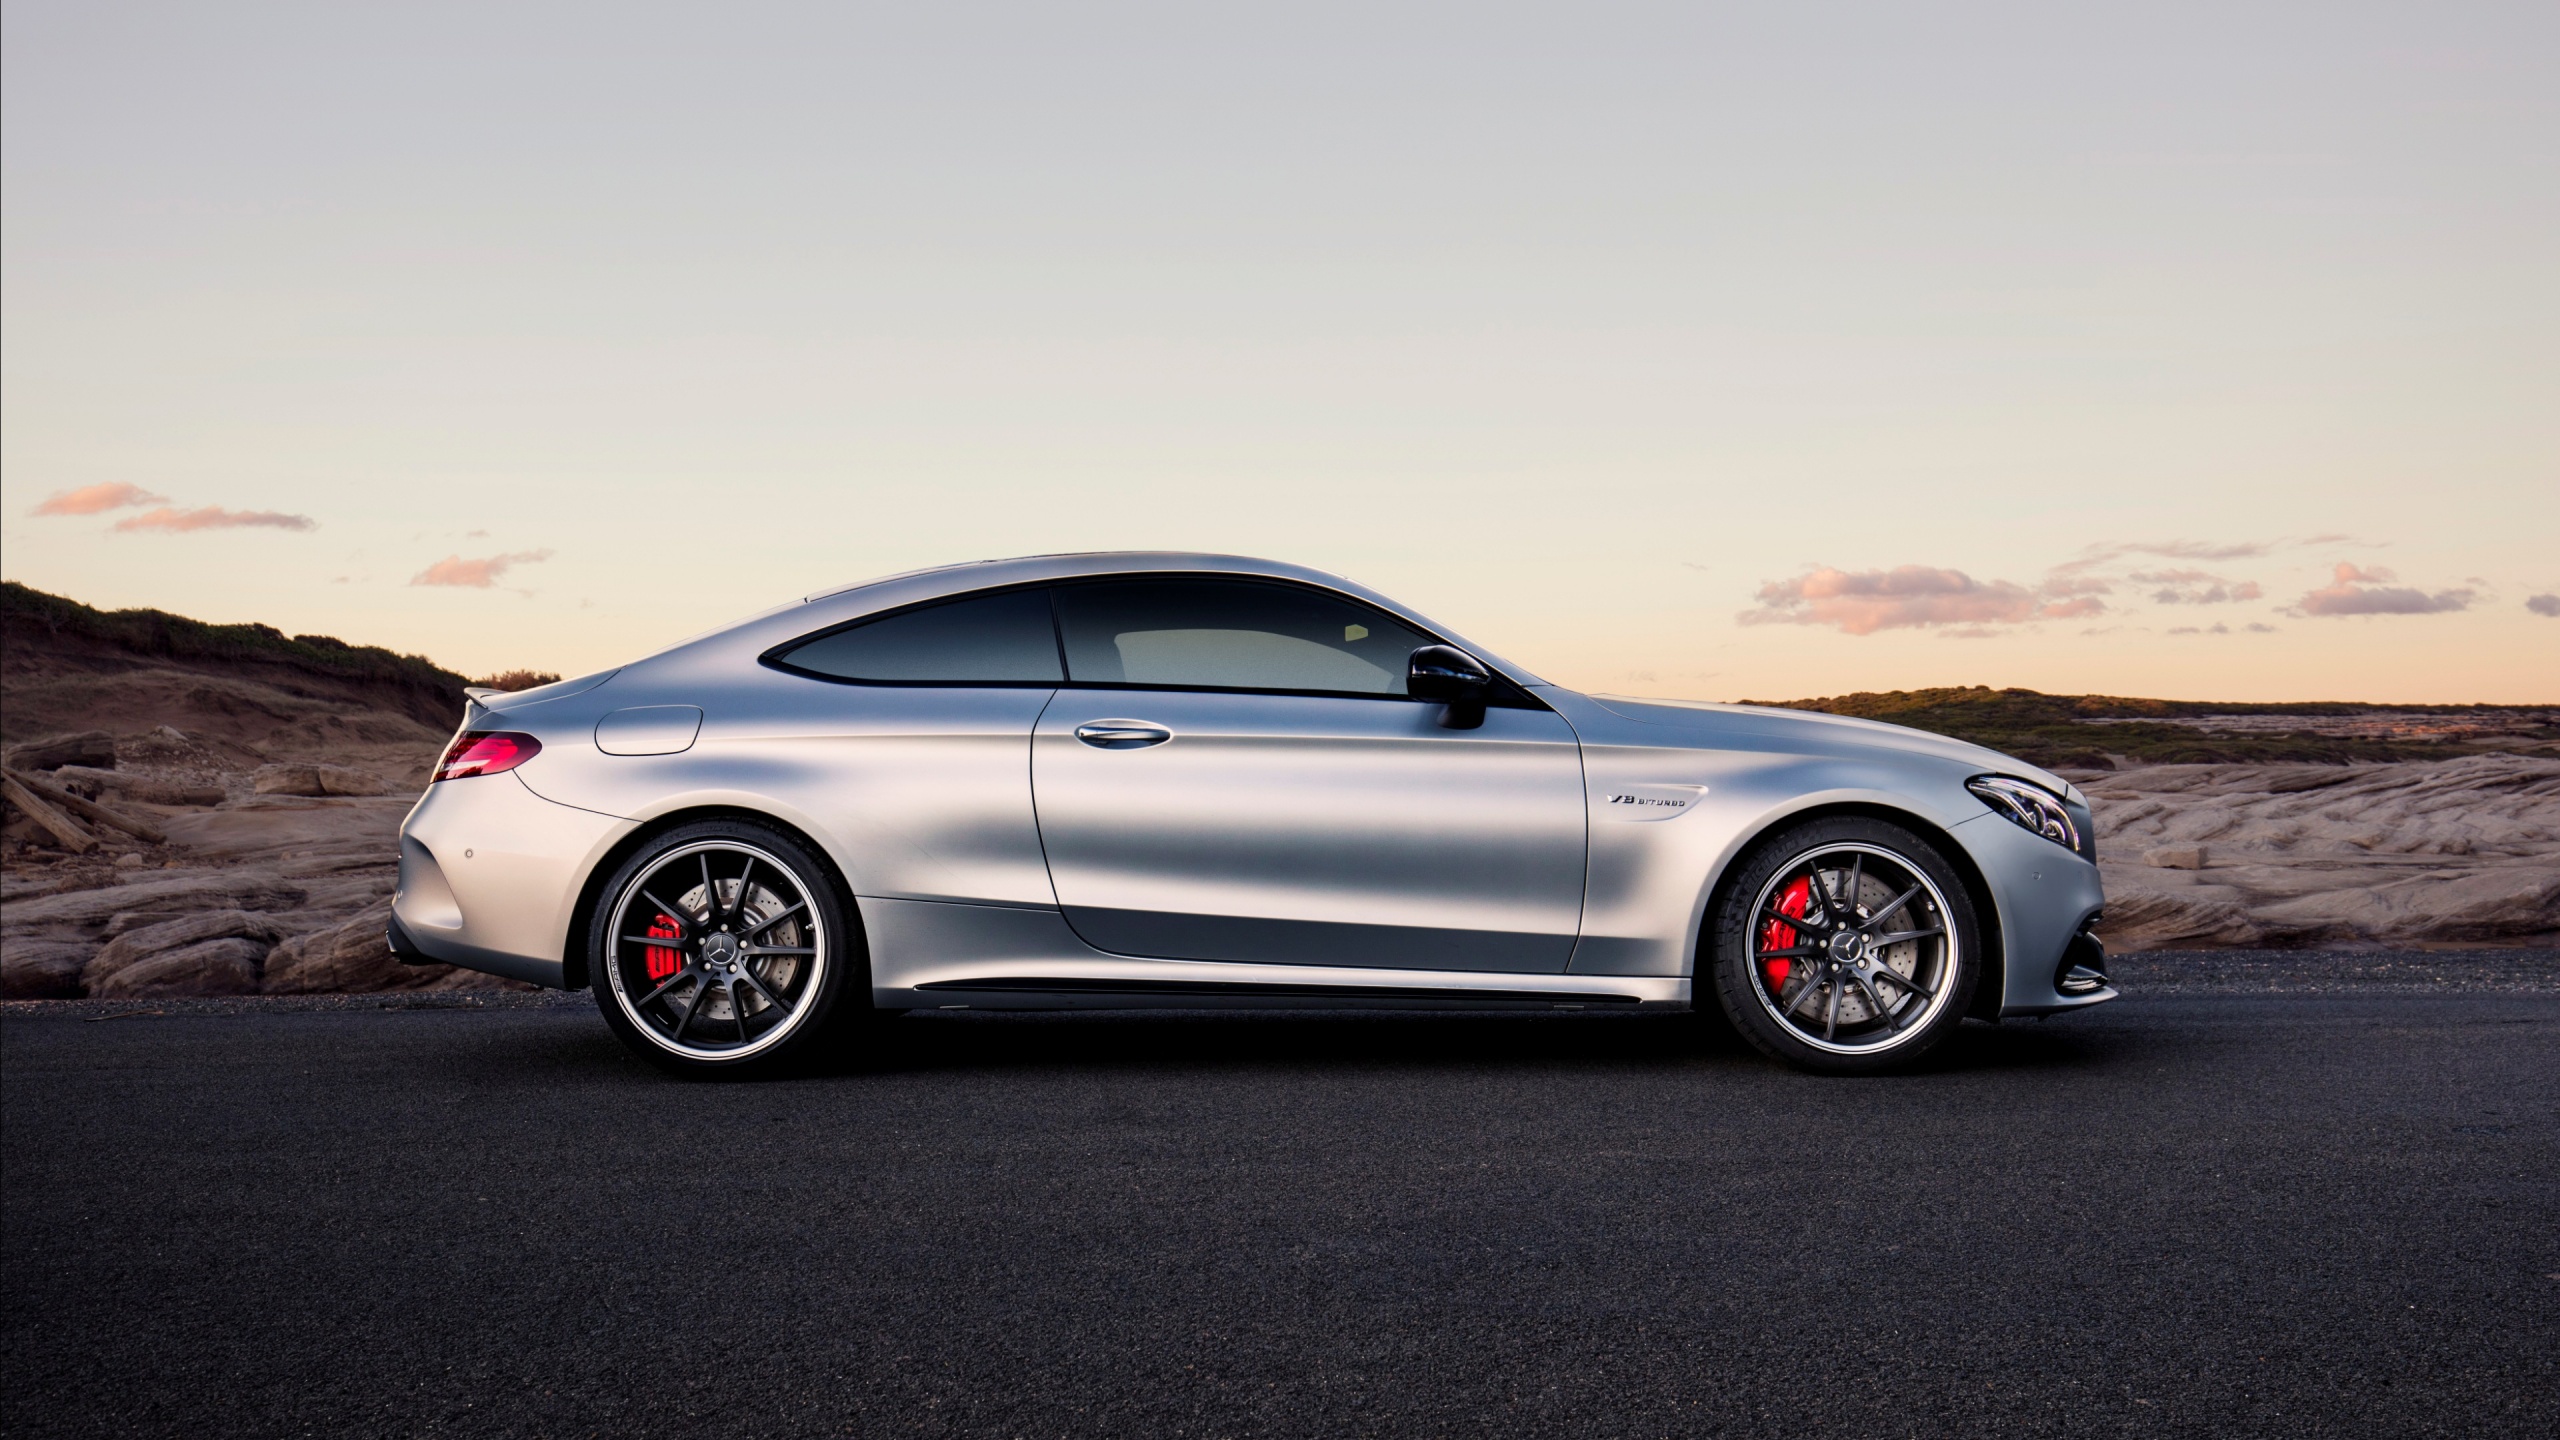 Mercedes Amg C63 S Coupe Wallpaper